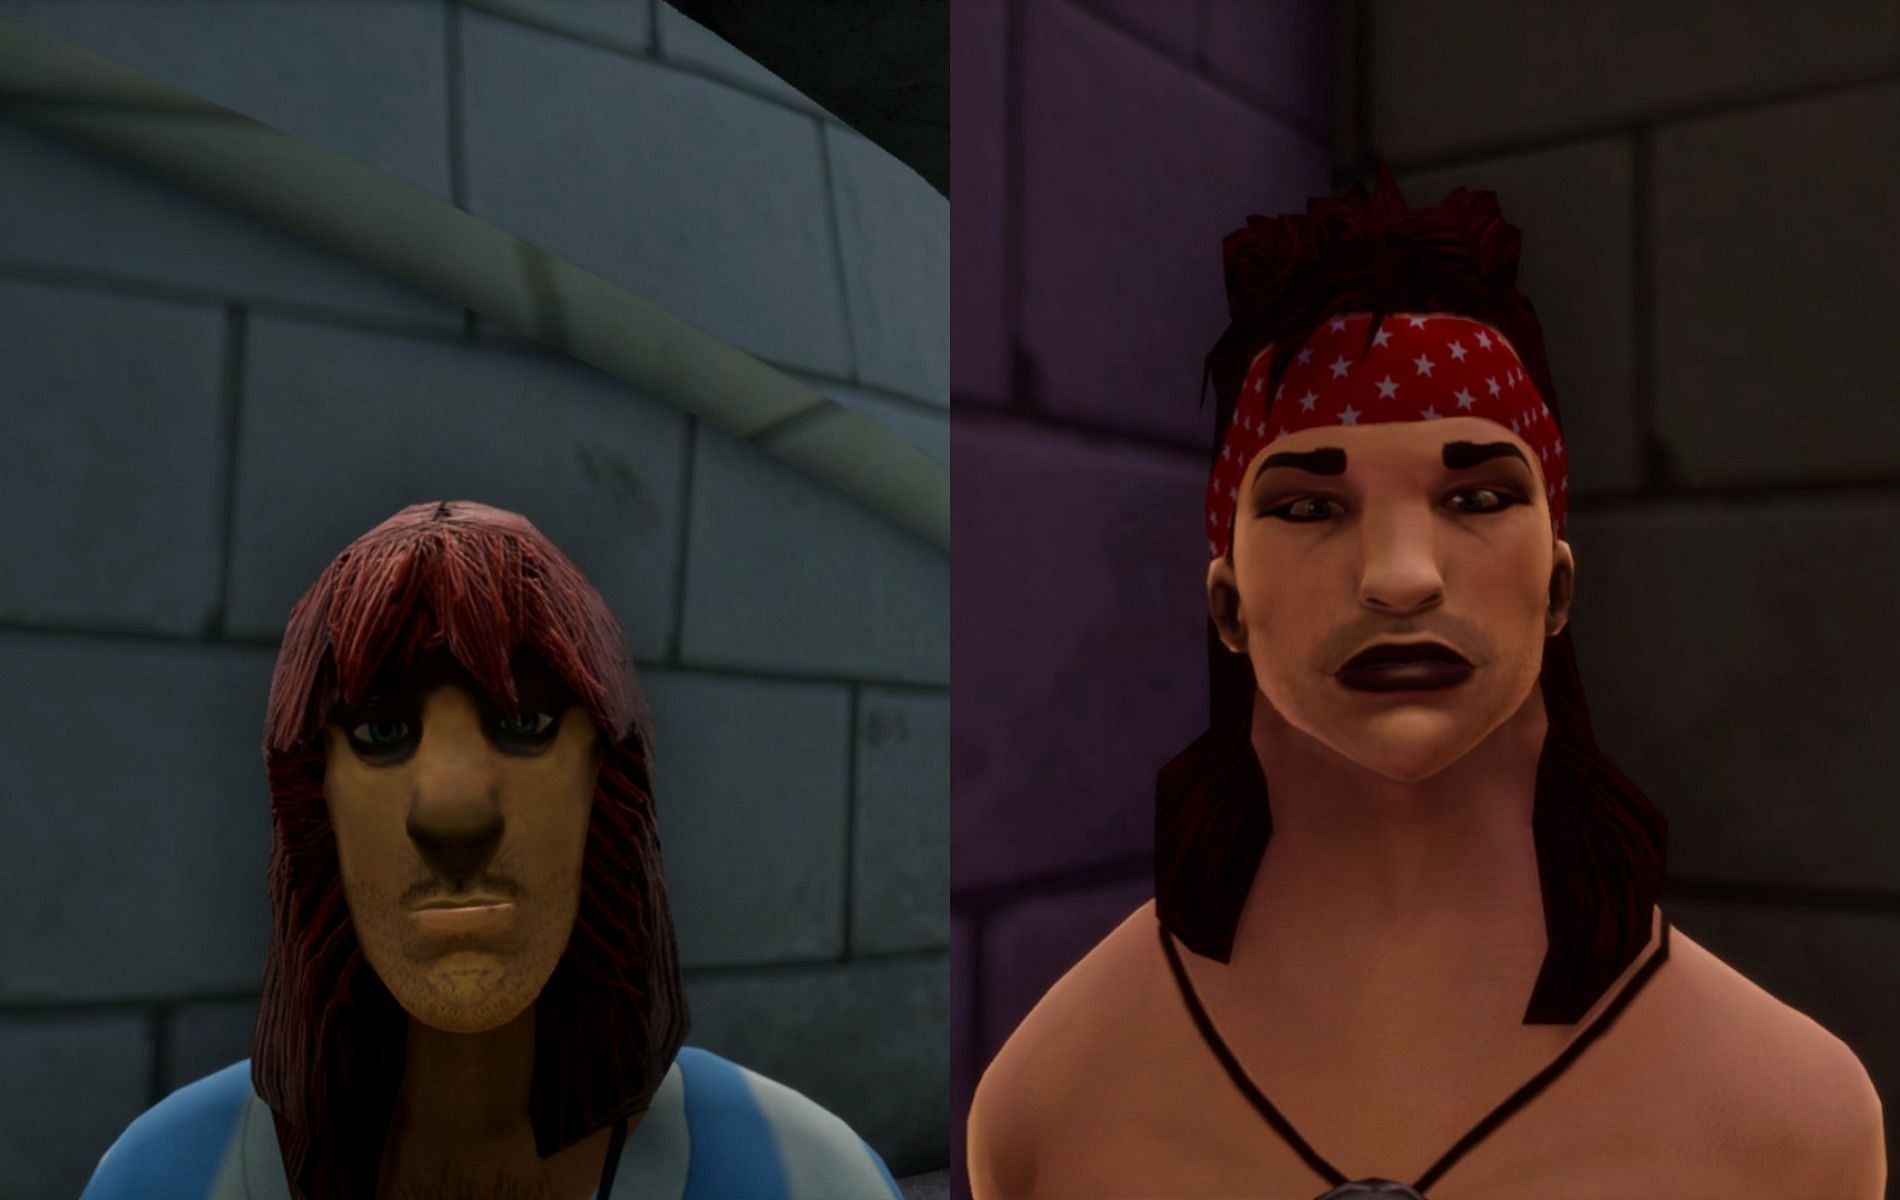 Their faces are barely recognizable now (Images via @DeekeTweak, Twitter)